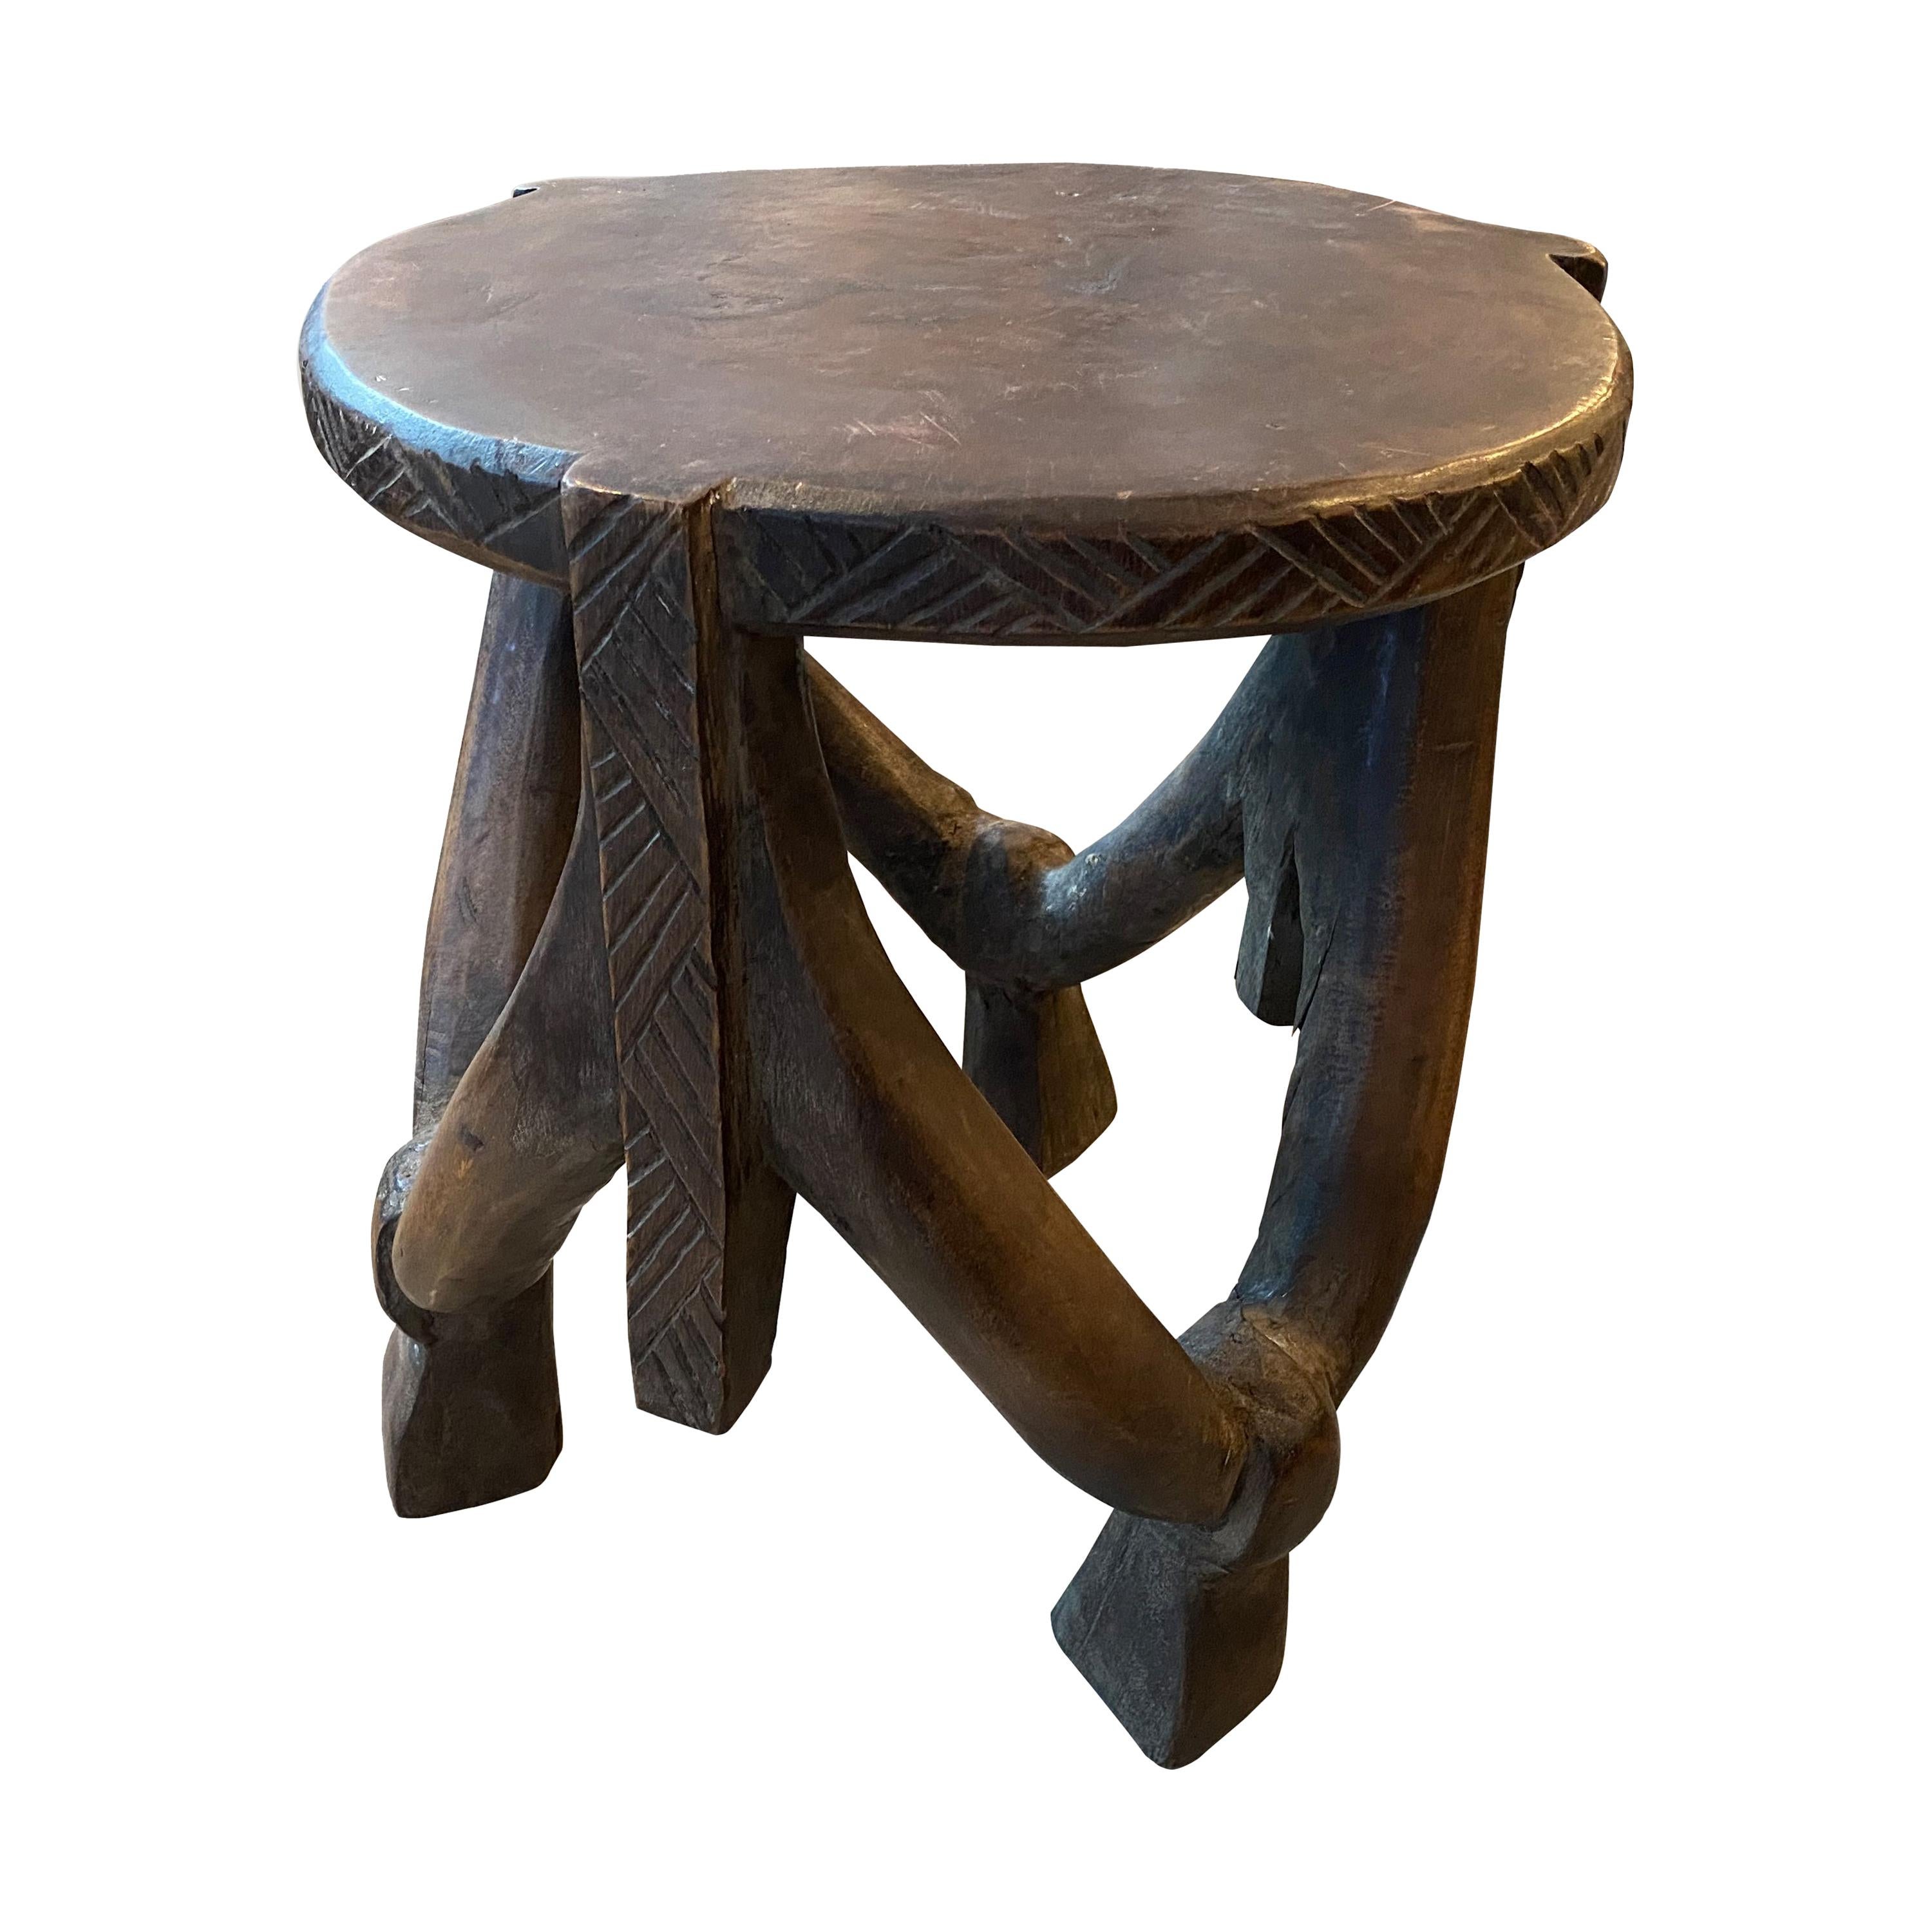 Andrianna Shamaris Antique Mahogany Wood African Sculptural Side Table or Stool